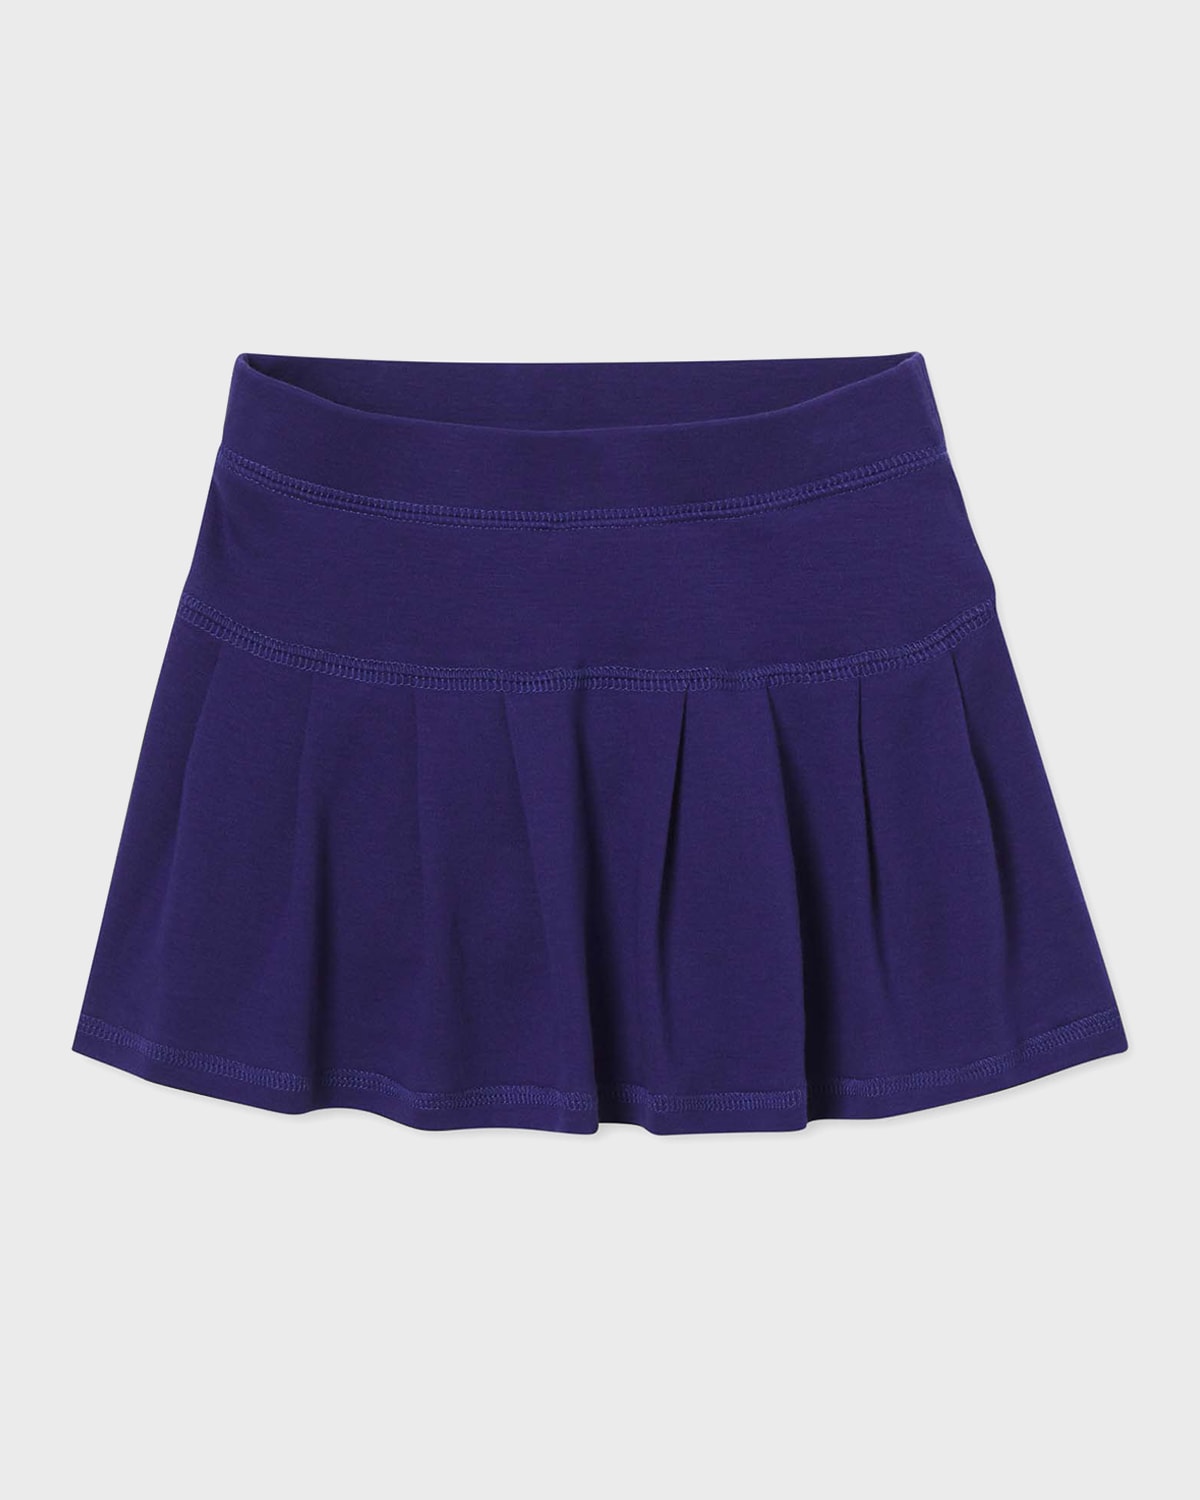 CLASSIC PREP CHILDRENSWEAR GIRL'S SCOUT KNIT SKORT IN SOLID